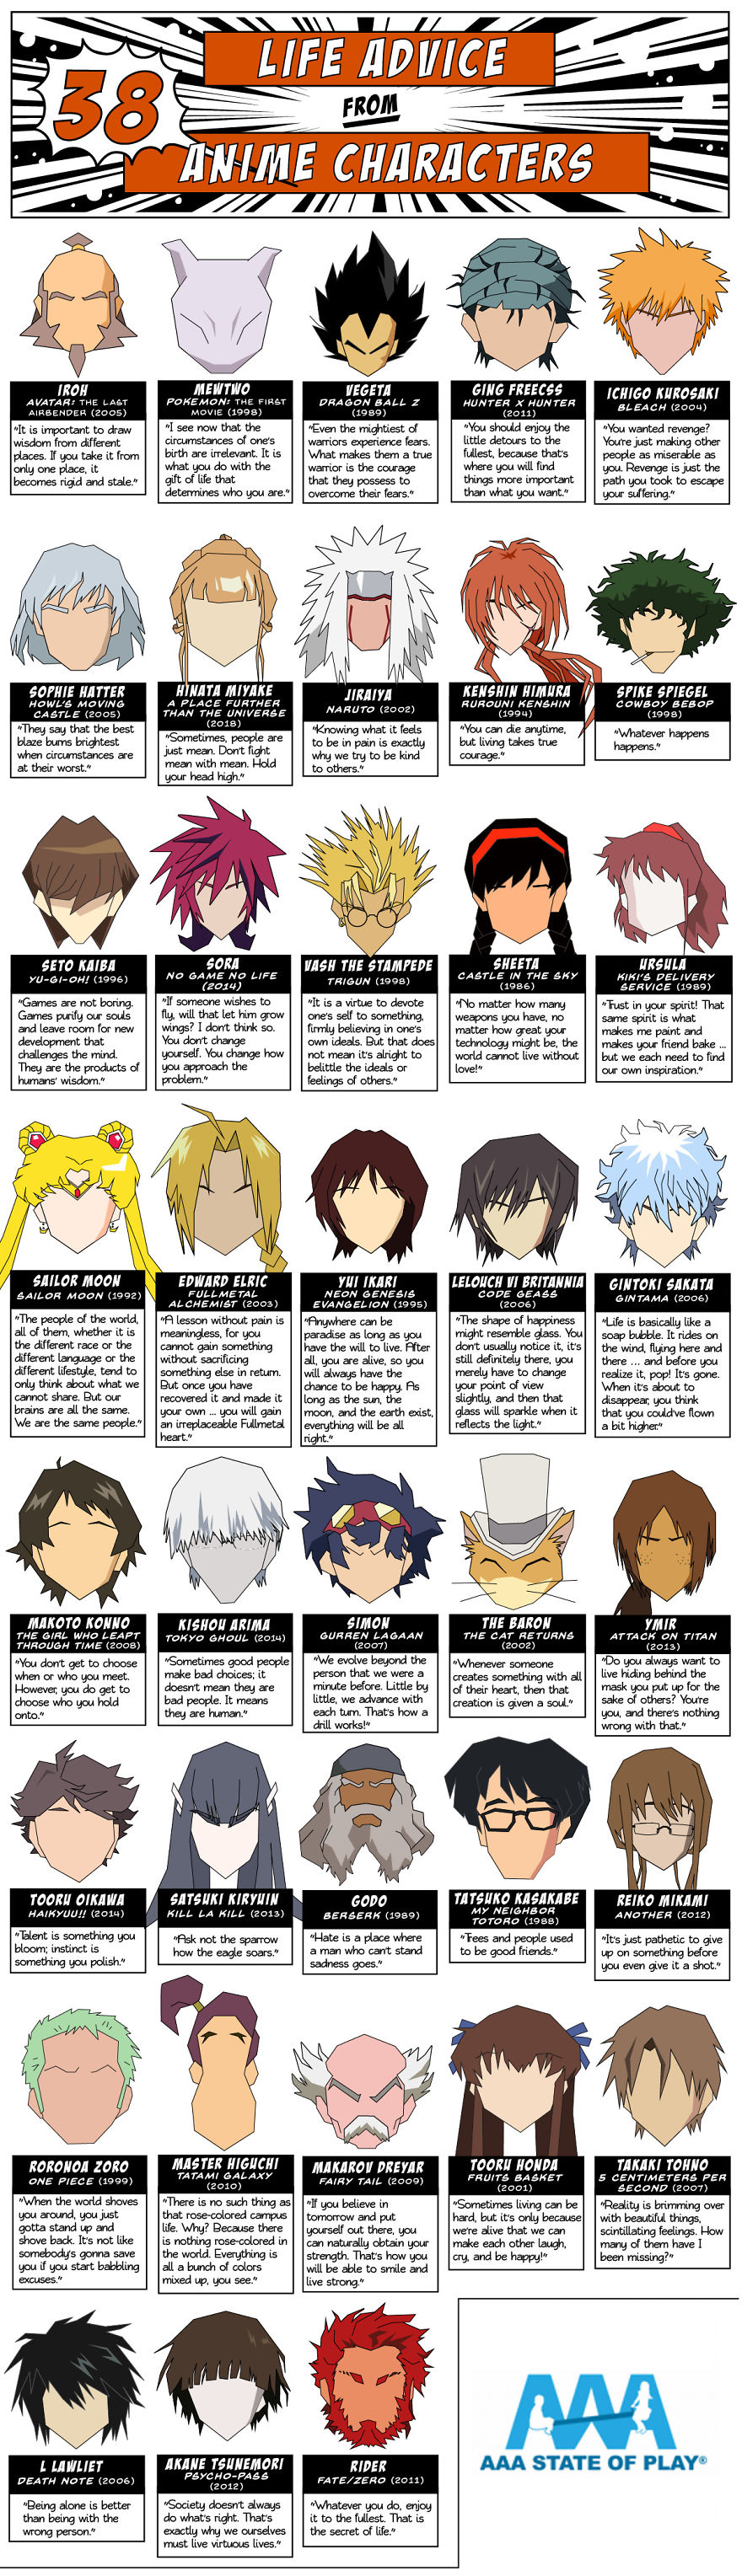 Life Advice From 38 Anime Characters